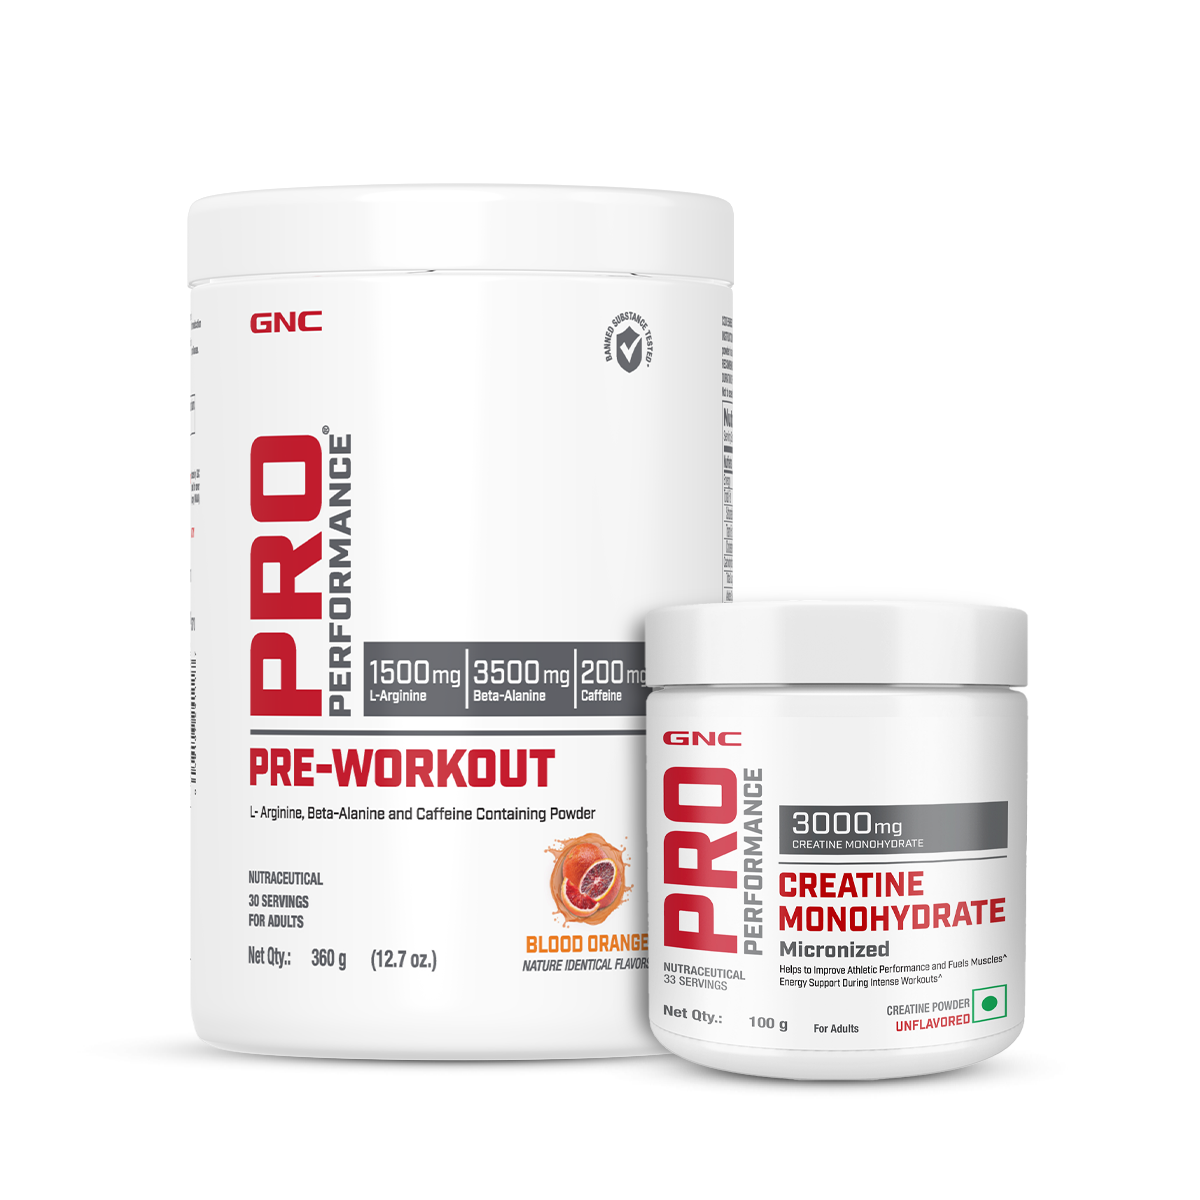 GNC Pro Performance Pre-Workout + Creatine 100 mg - Improves Energy & Focus | Supports Intense Workout